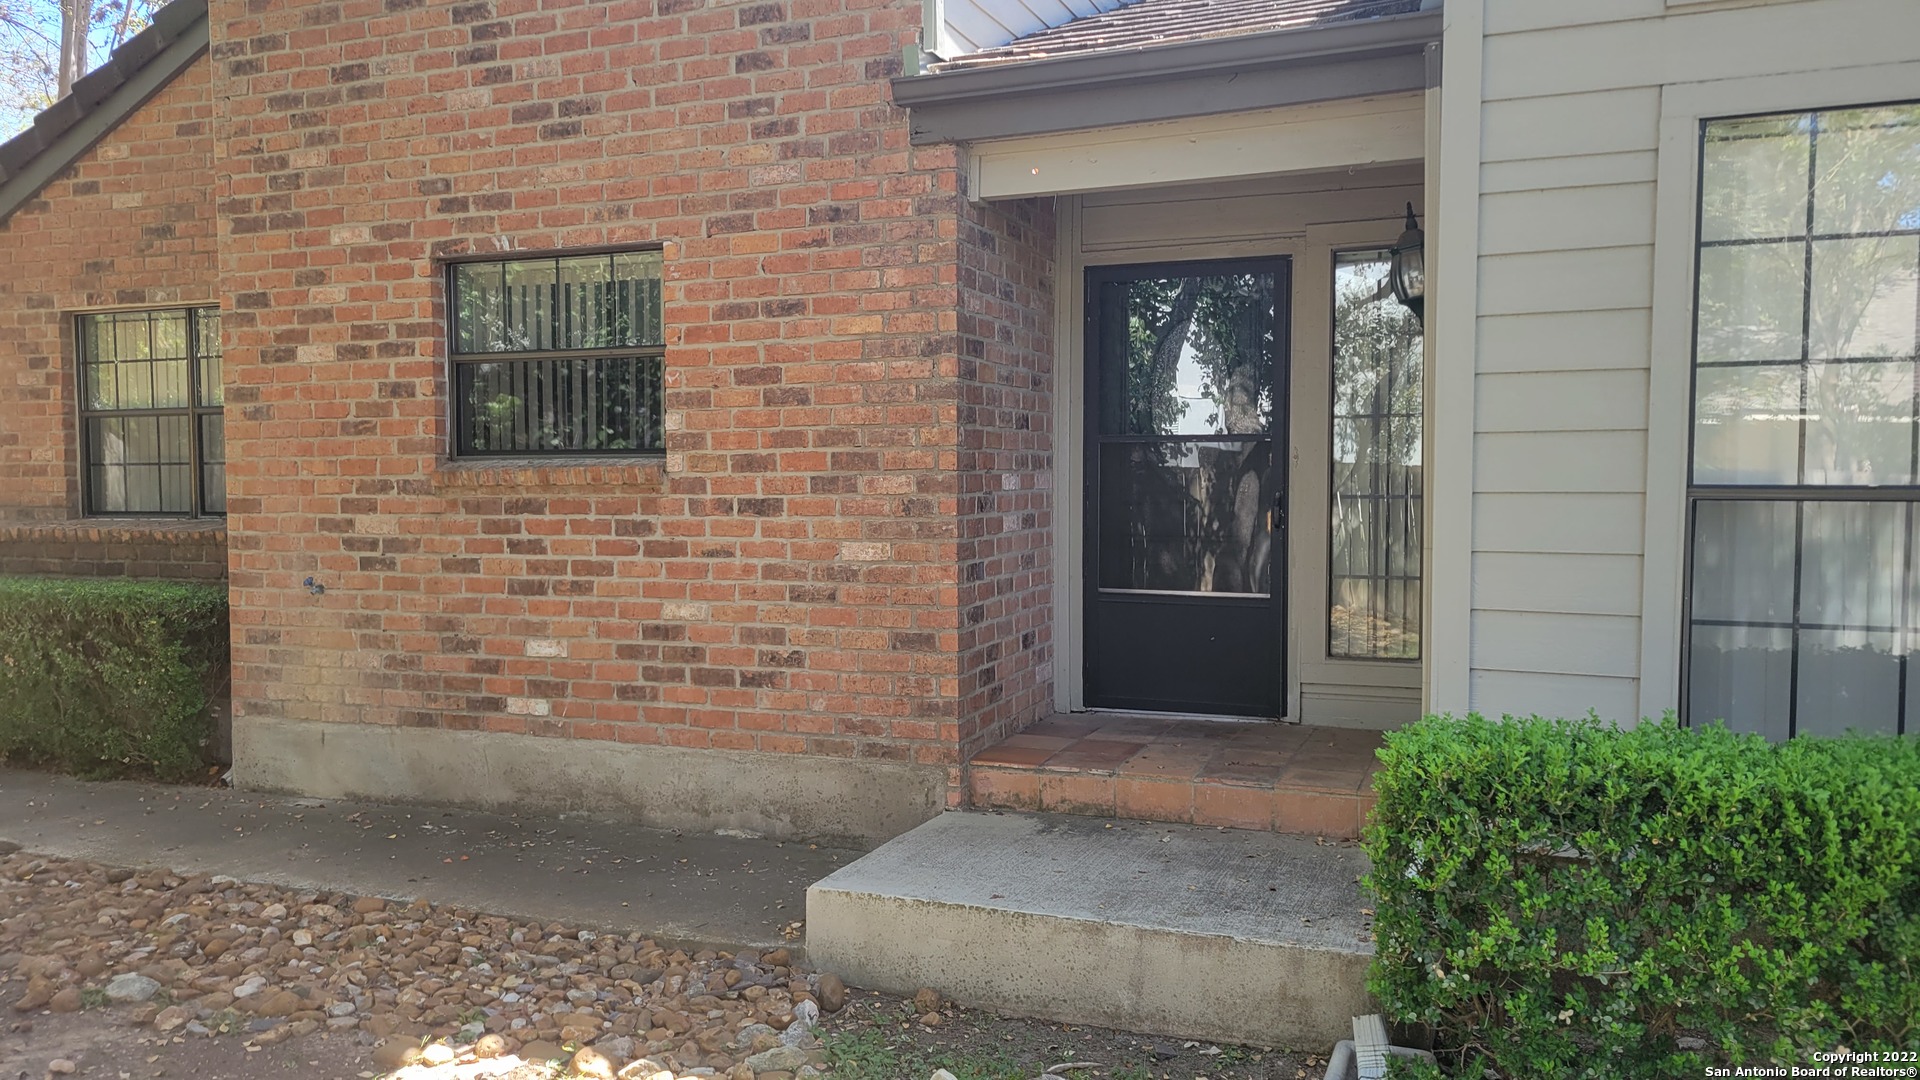 Nice 2/2/2 condo in NC San Antonio with easy access to 1604, 281 and shopping.  End unit, lots of natural light, mature trees.  Outside access from living room and master suite to shaded wooden deck.